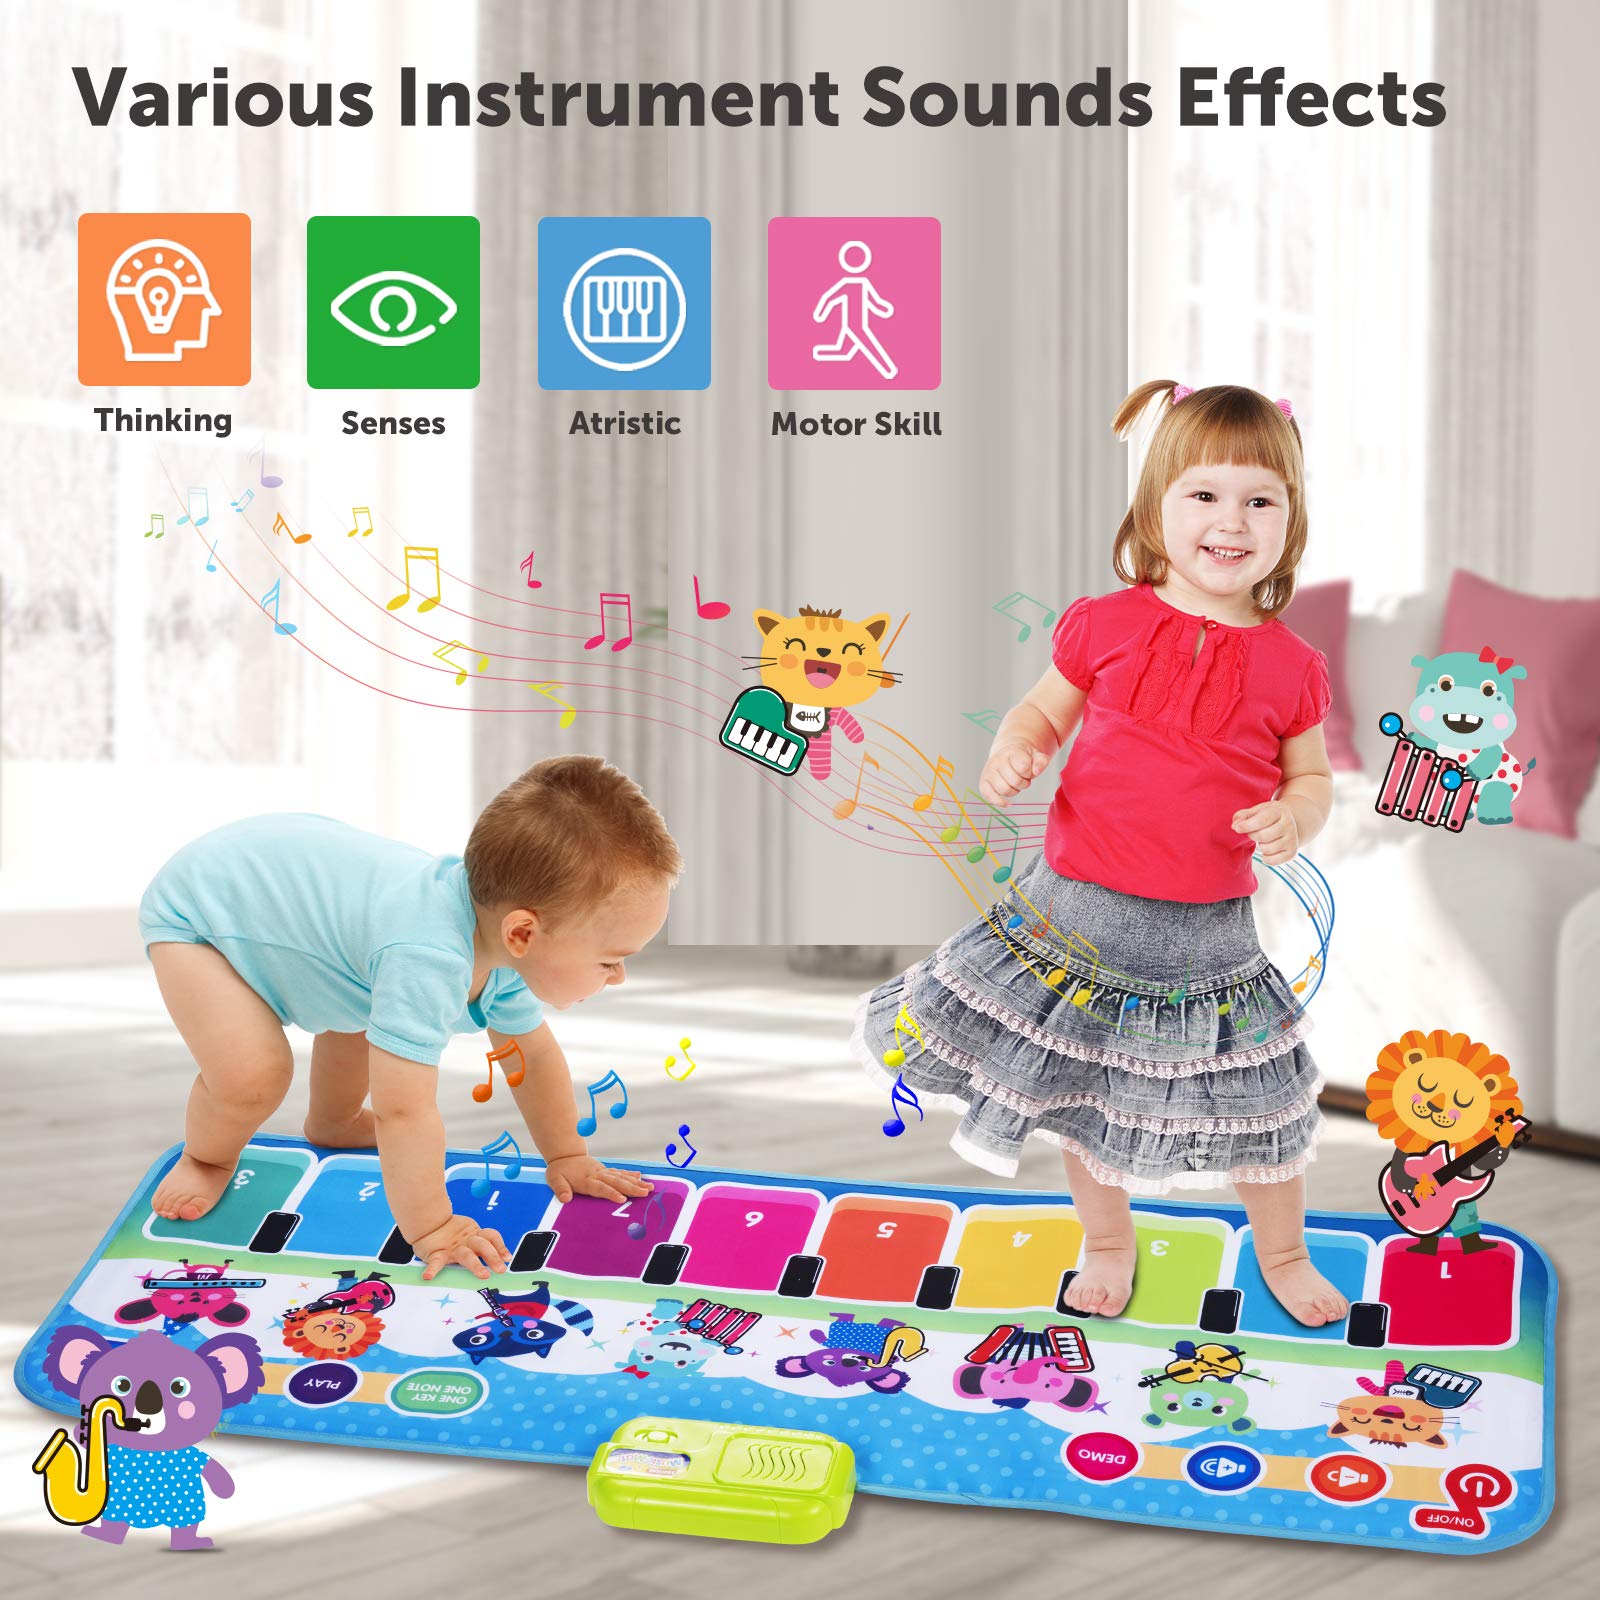 Joyjoz Piano Mat, Upgraded Musical Mat with 8 Instruments Sounds Child Floor Keyboard Touch Play Blanket Dance Mat Build-in Speaker & Recording Function Xmas Gift Toys for Baby Girls Boys Toddlers